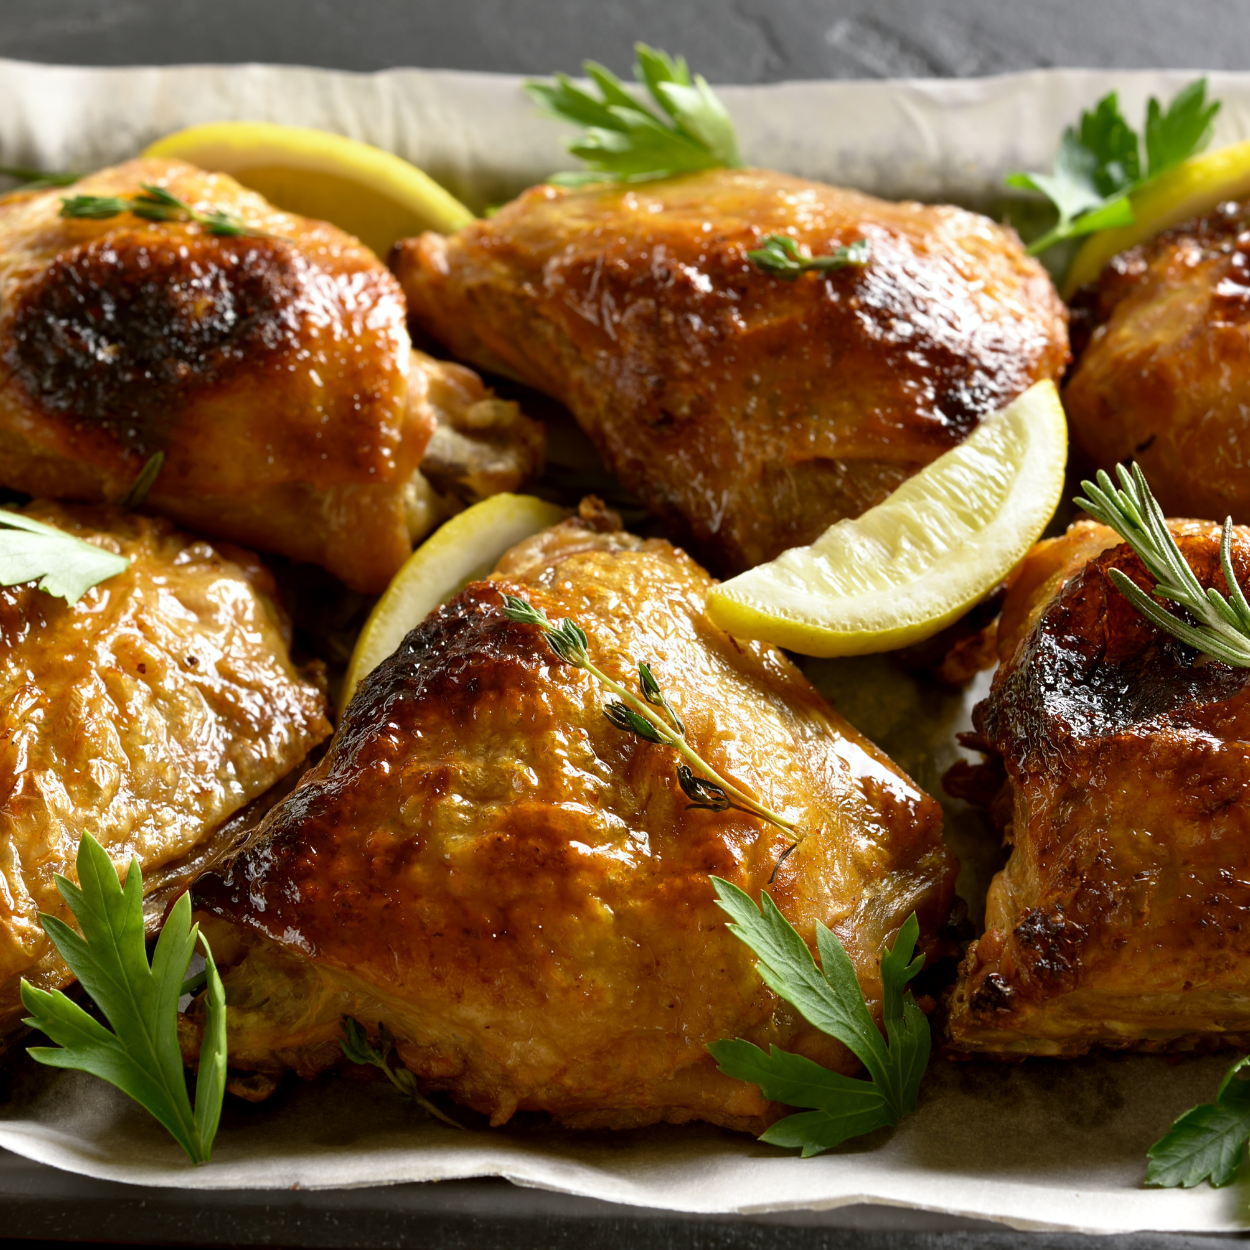 Chicken thighs with lemon wedges and herbs on parchment paper.